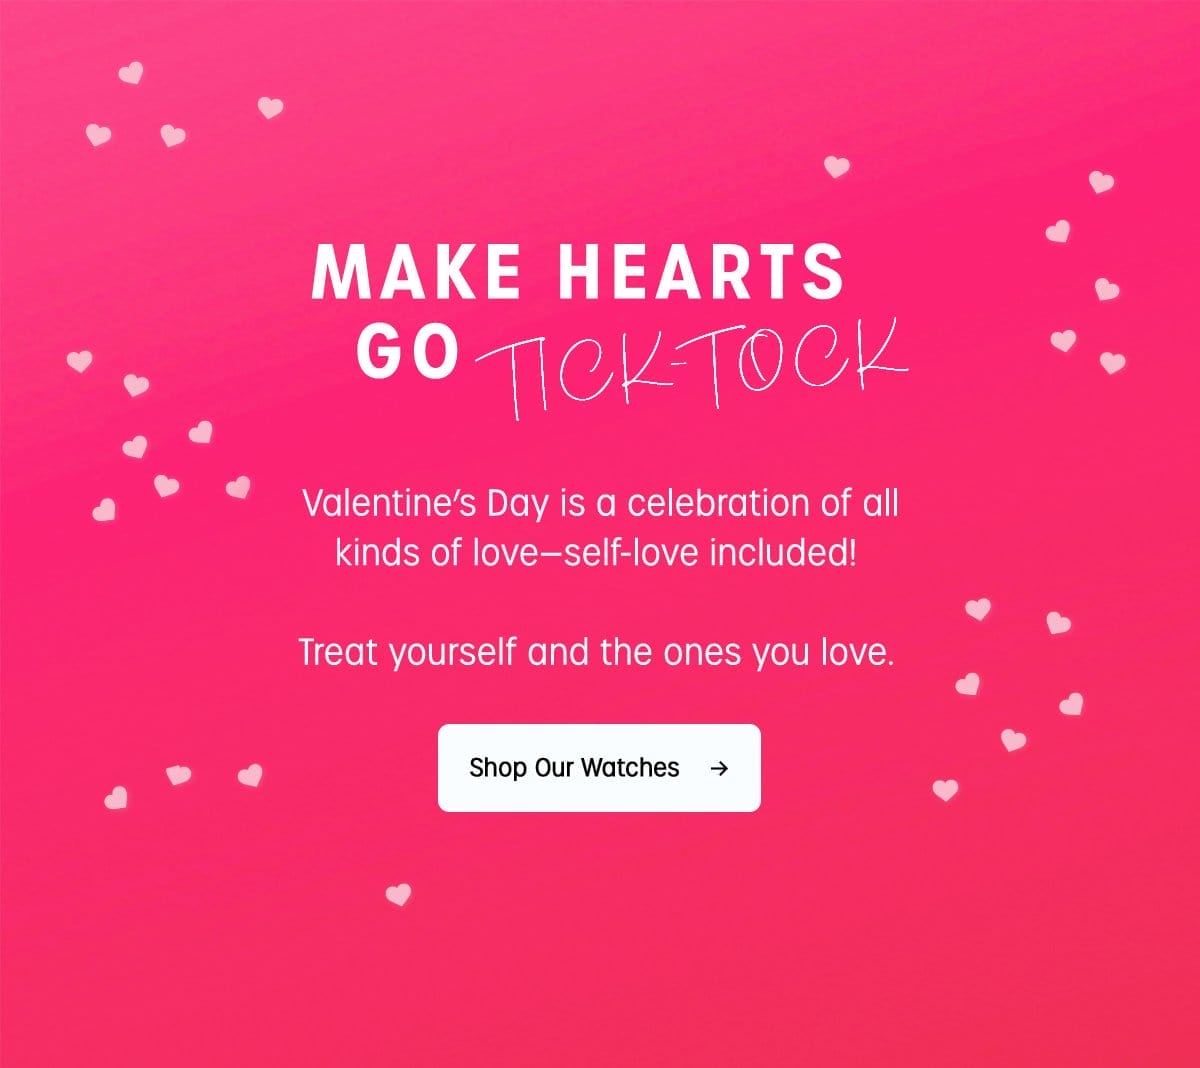 MAKE HEARTS GO TICKTOCK | Valentine's Day is a celebration of all kinds of love-self-love included!